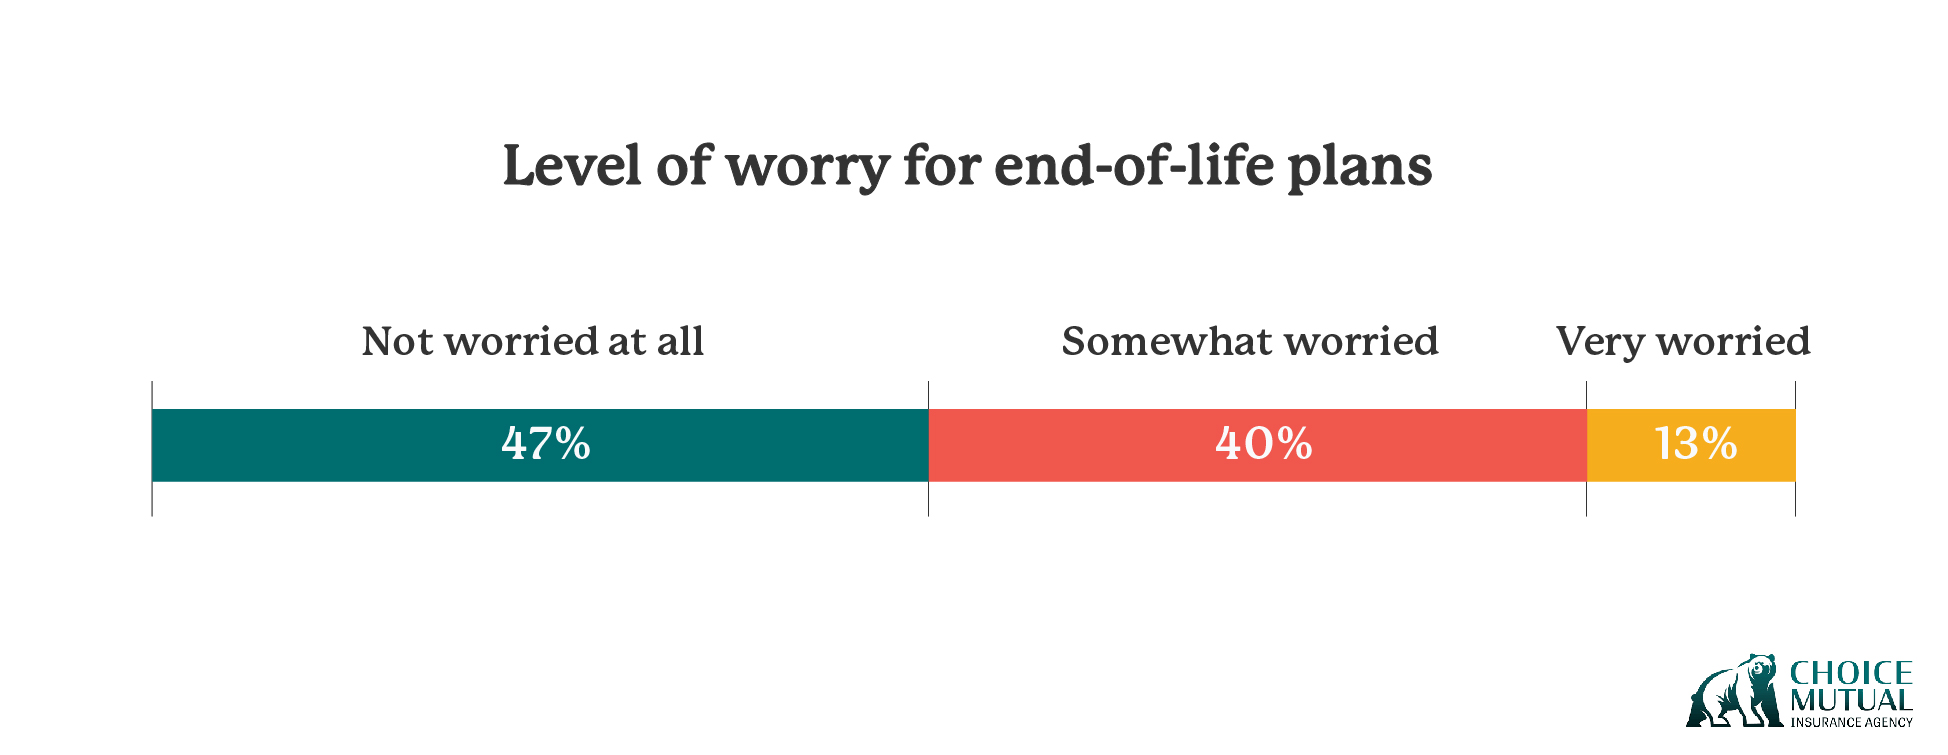 A chart showing what percentage of people are worried about their end of life plans